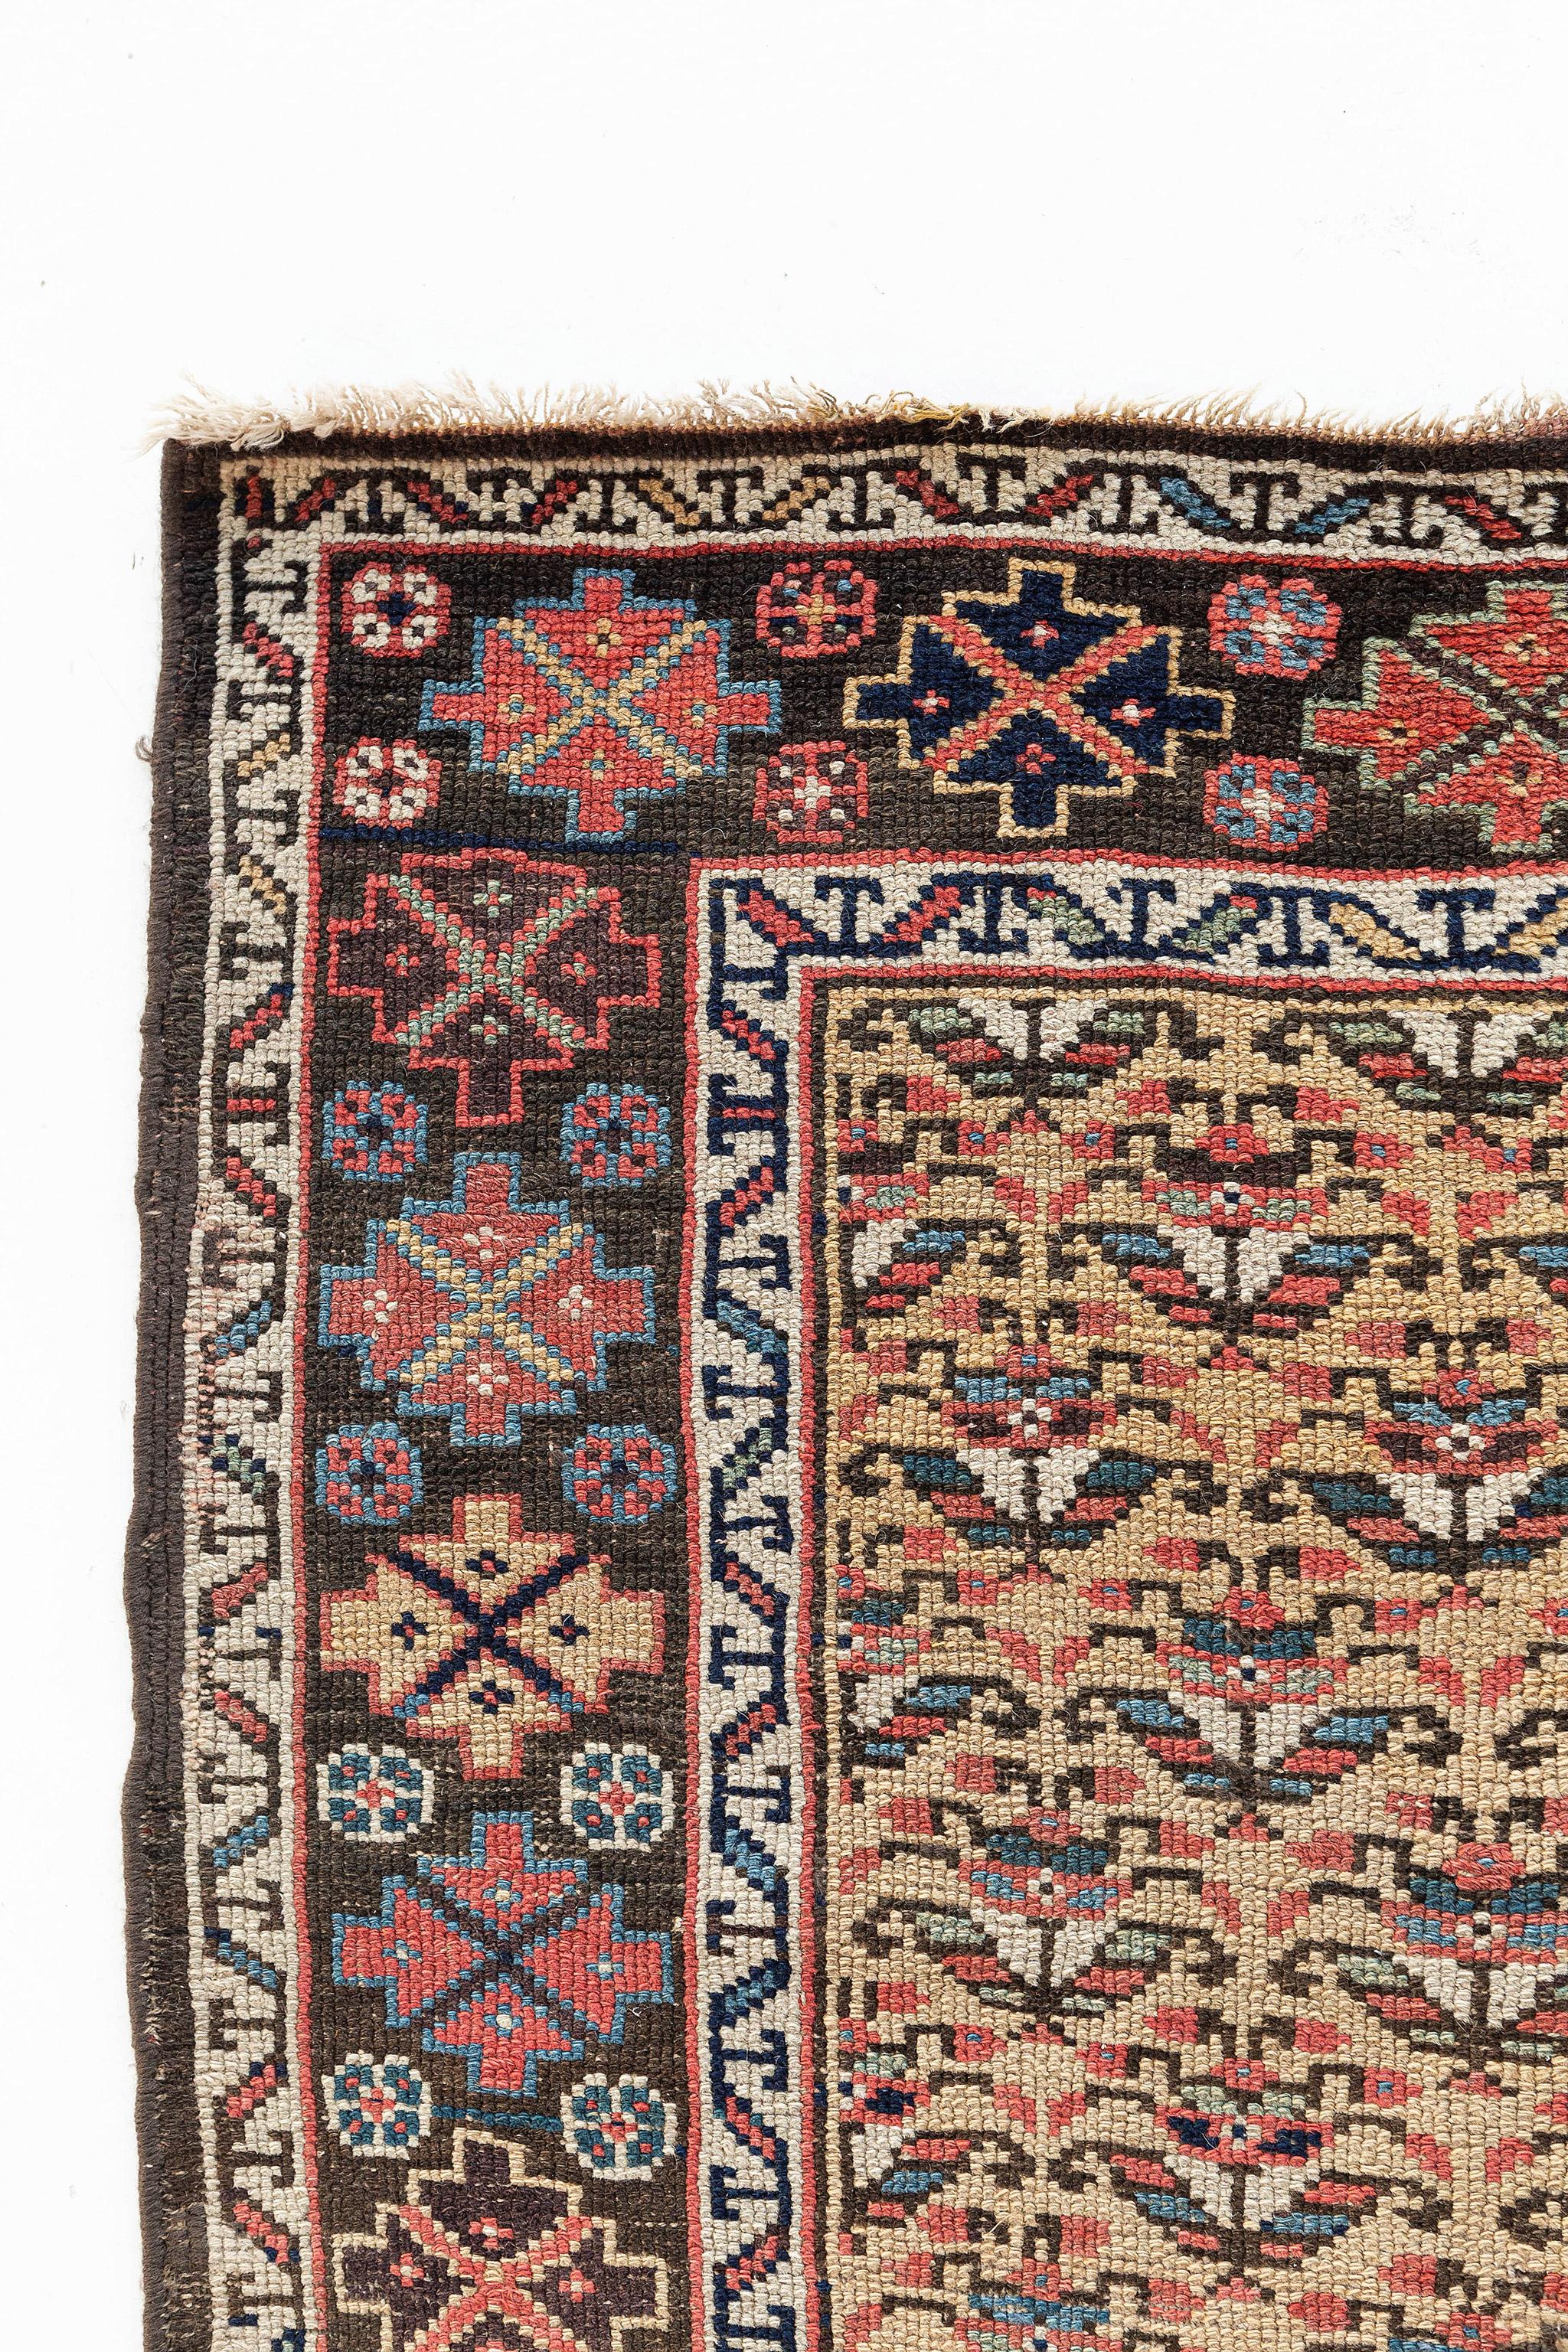 Made completely out of wool, this antique Kurdish Persian Runner rug comes from the ethnic Kurds of Iran. World renowned for their weaving, this Kurdish rug bears the standard of quality. Although antique by age, it will continue to provide many